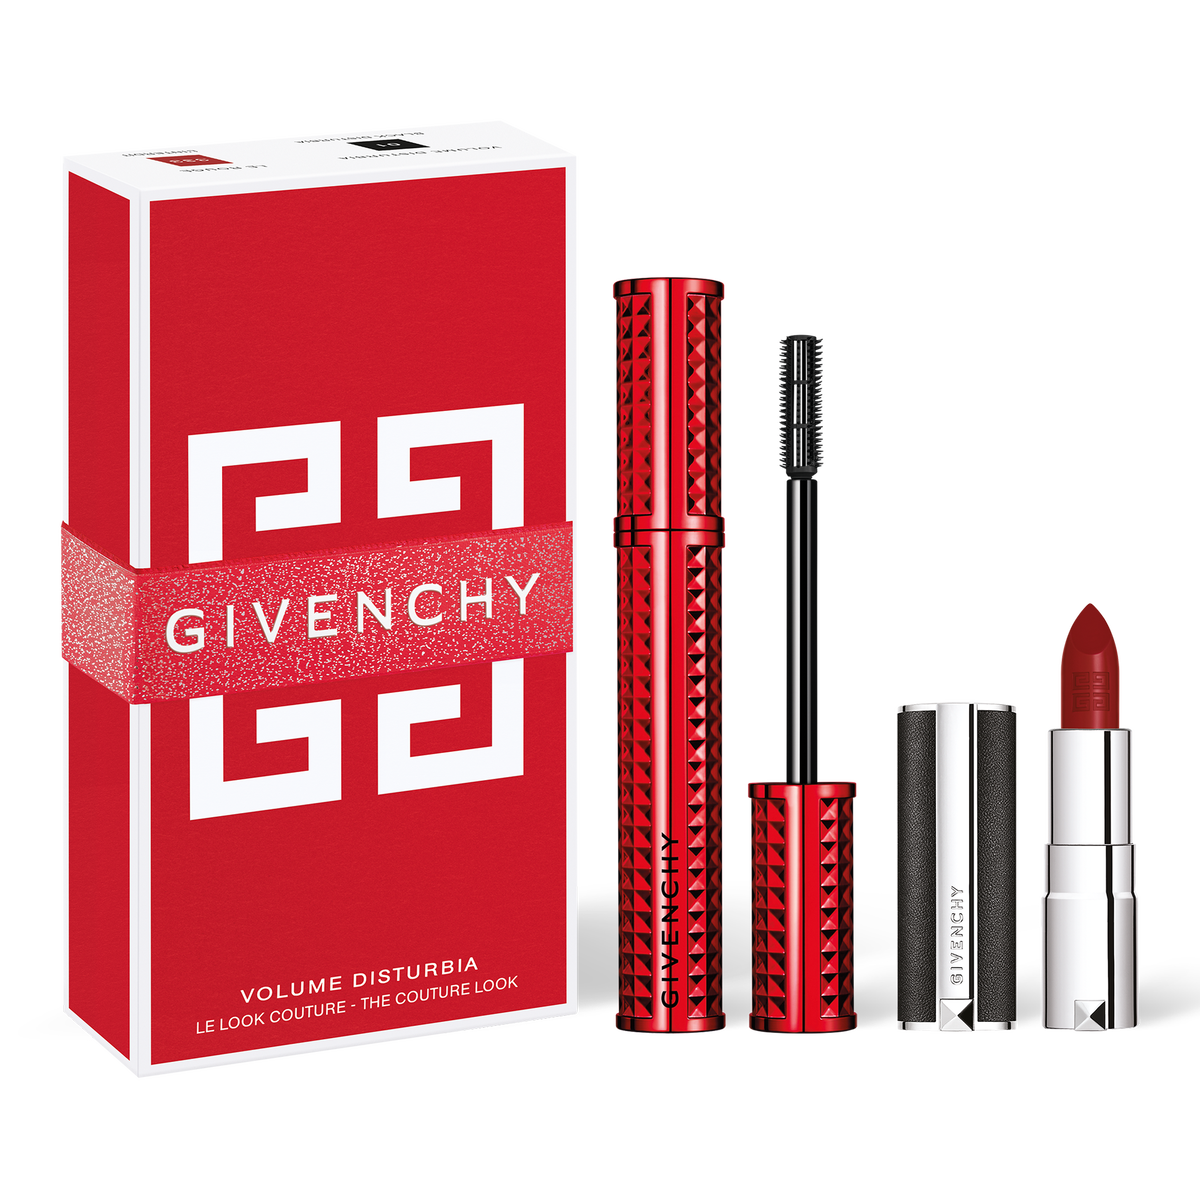 VOLUME DISTURBIA - CHRISTMAS GIFT SET | GIVENCHY BEAUTY - Le look couture |  Givenchy Beauty